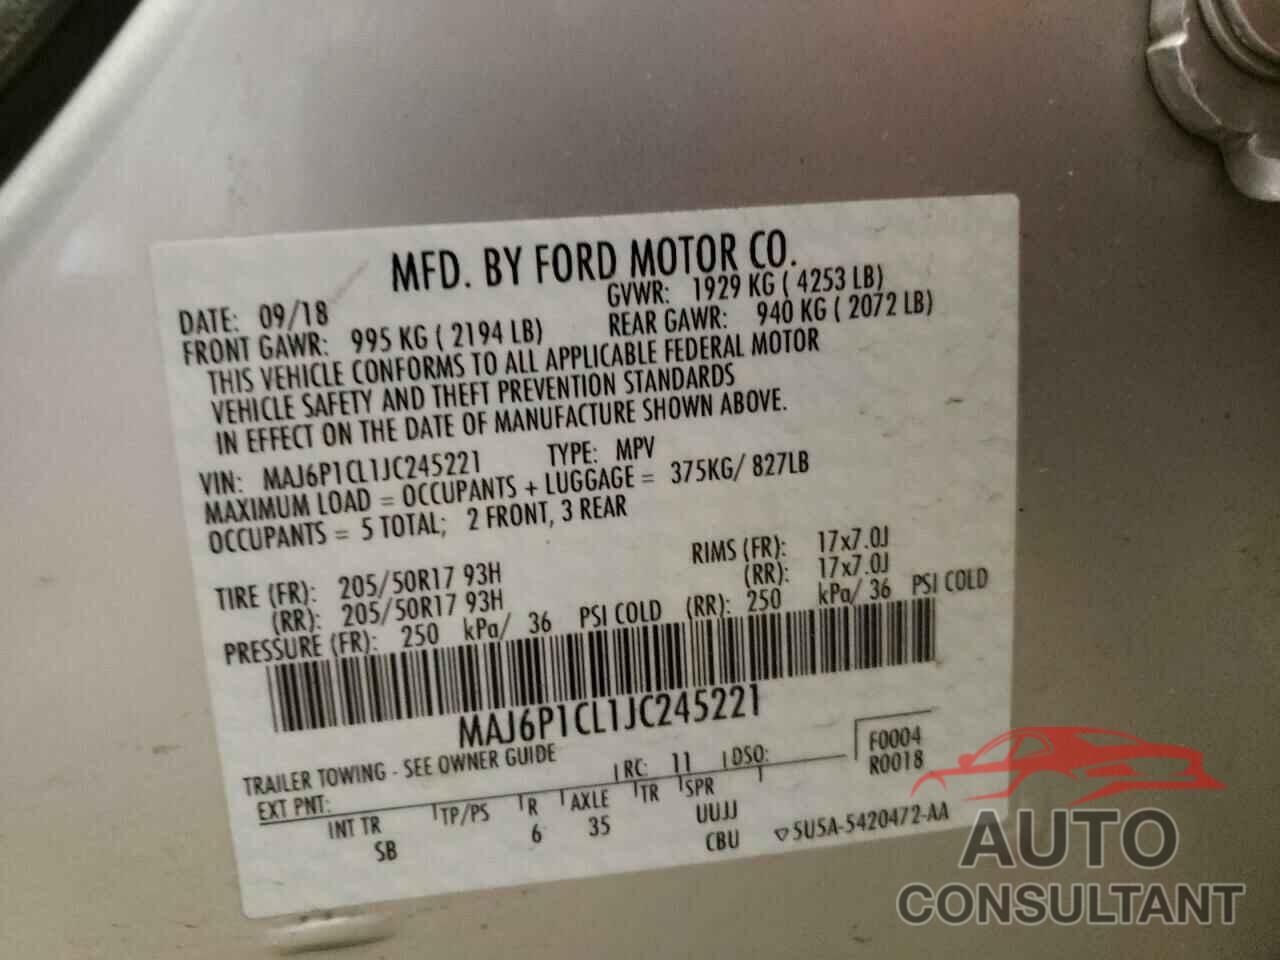 FORD ALL OTHER 2018 - MAJ6P1CL1JC245221